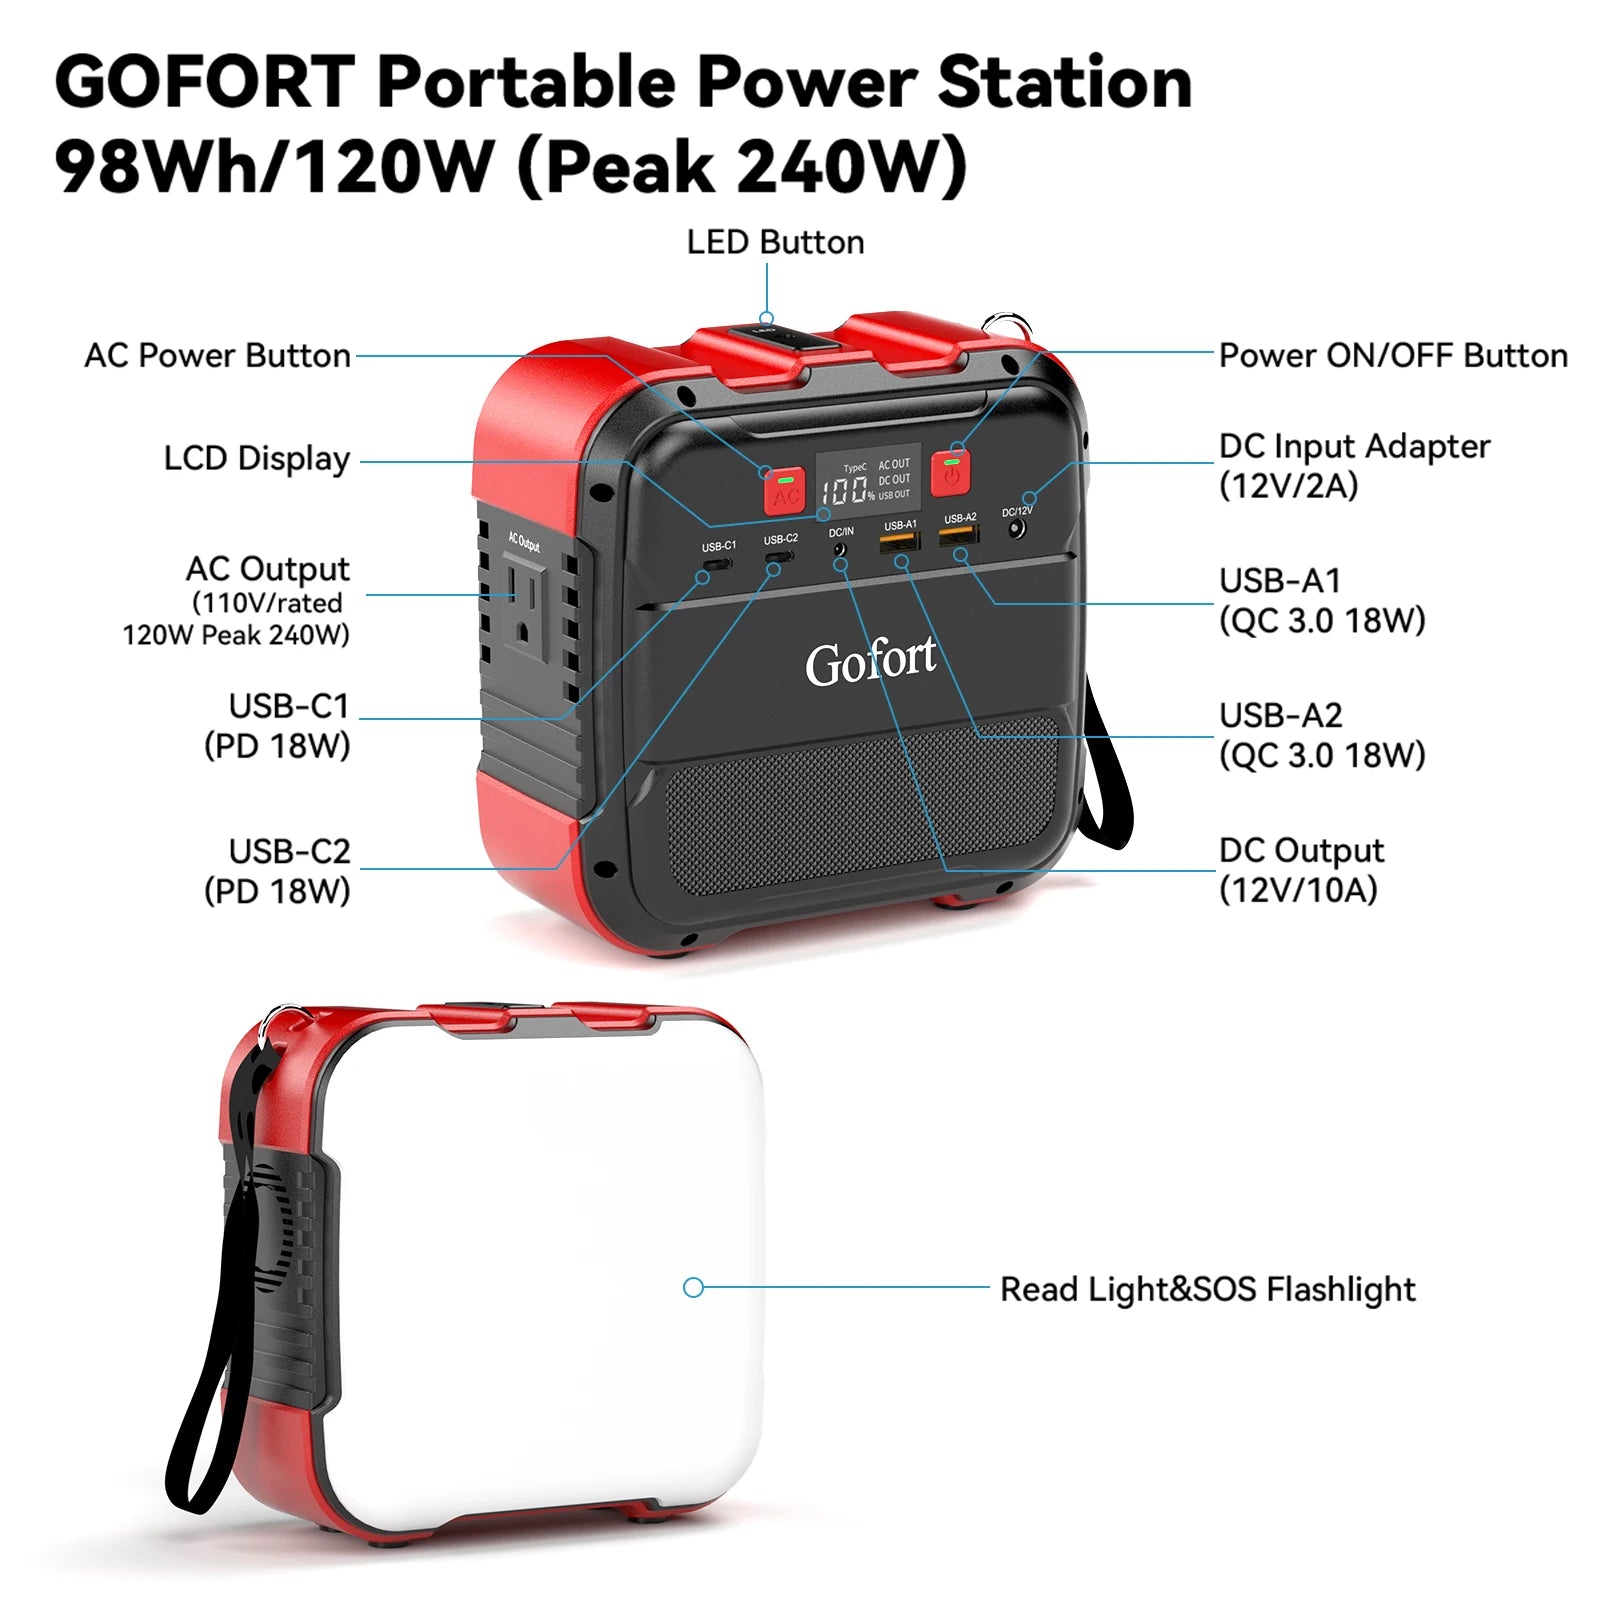 GOFORT A101G Portable Power Station 120W - Inverted Powers